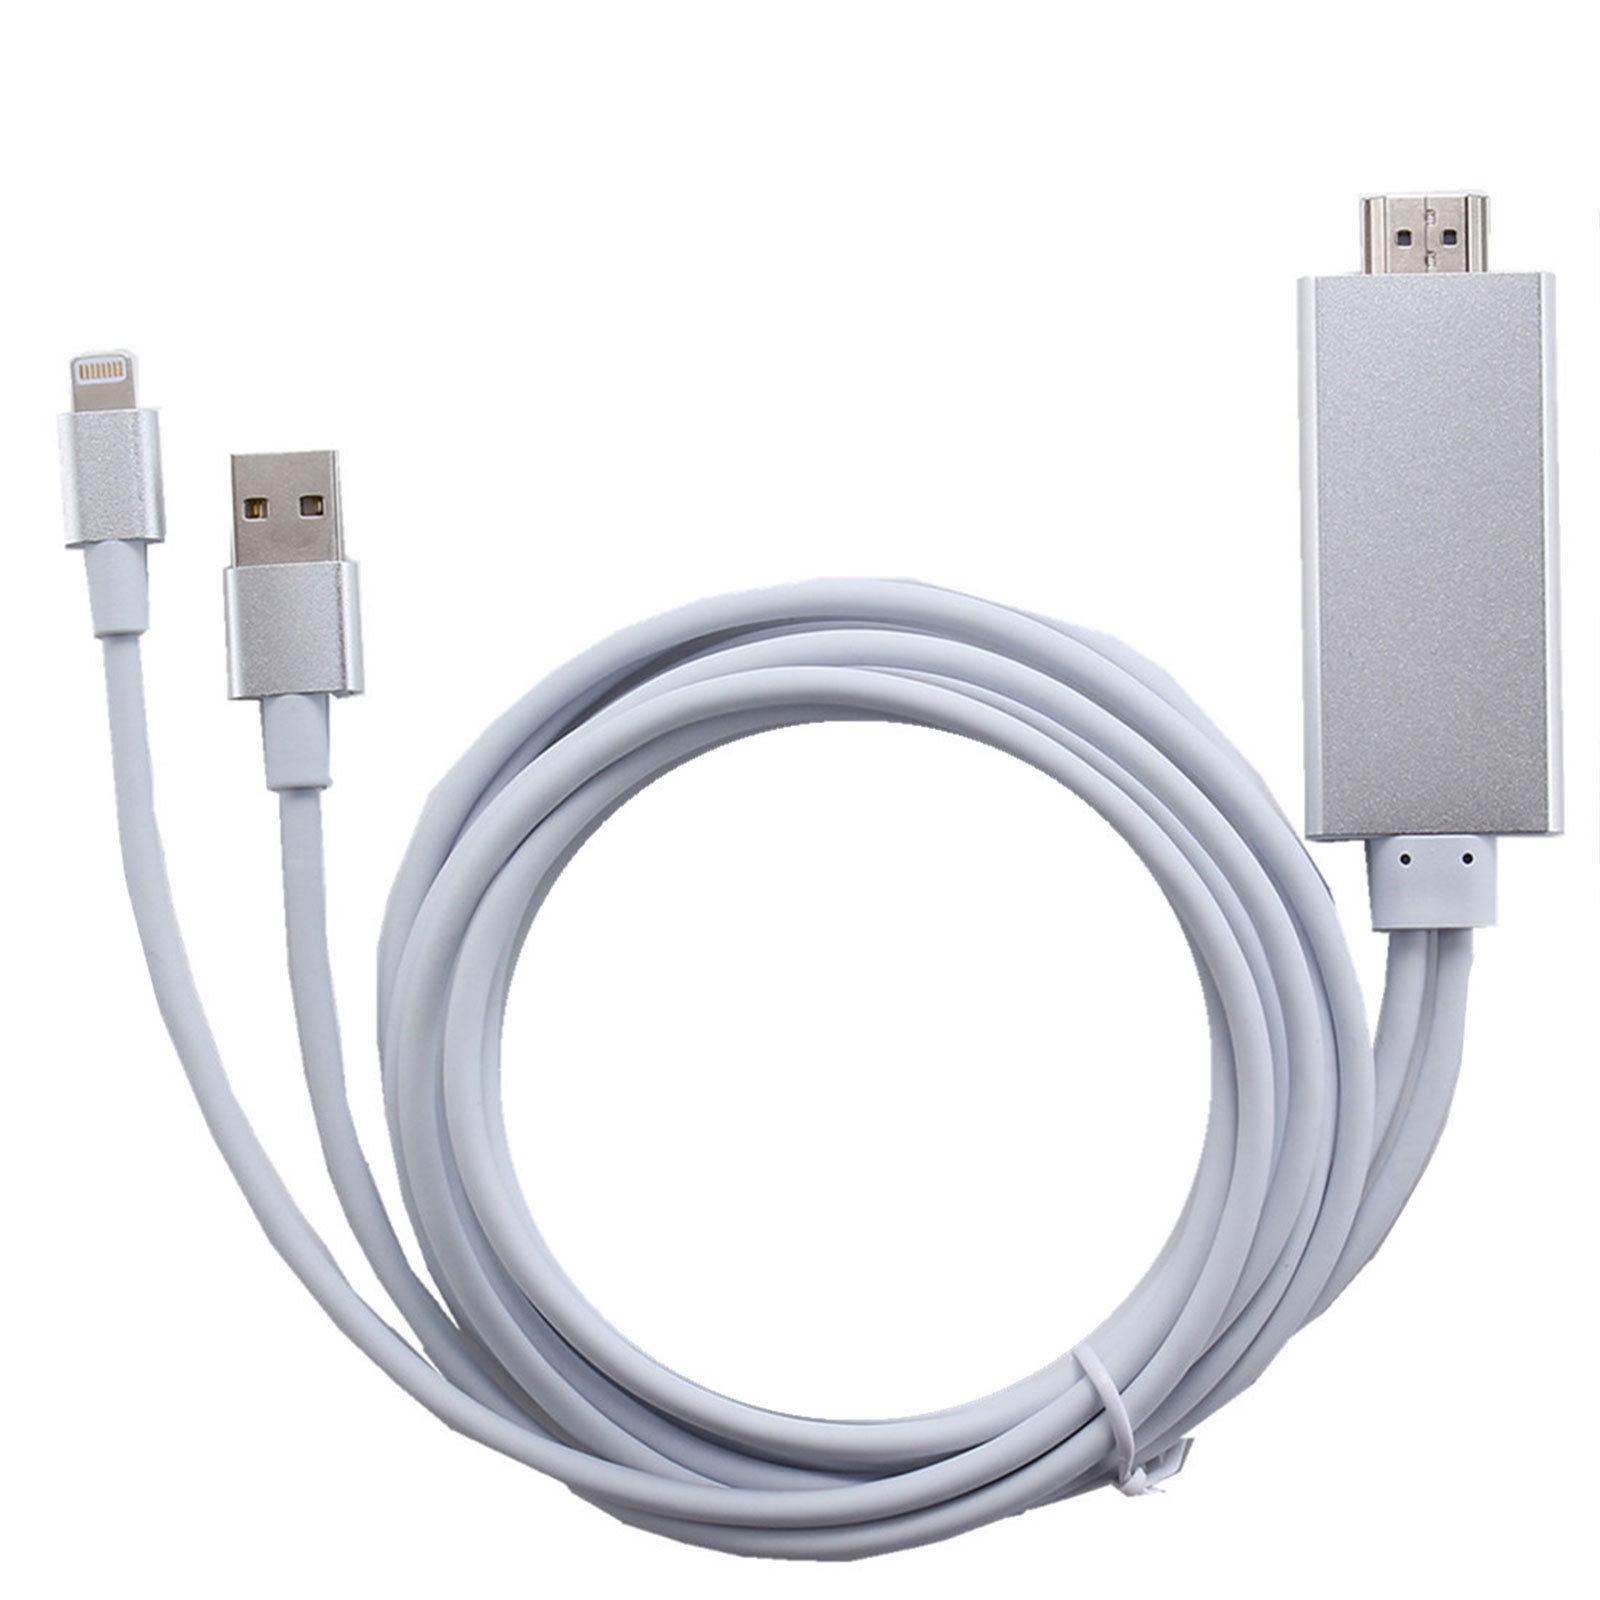 Lightning to Cable Adapter HDTV Cable for iPhone,iPad Air/mini/Pro, touch, Compatible with newest iOS | Walmart Canada